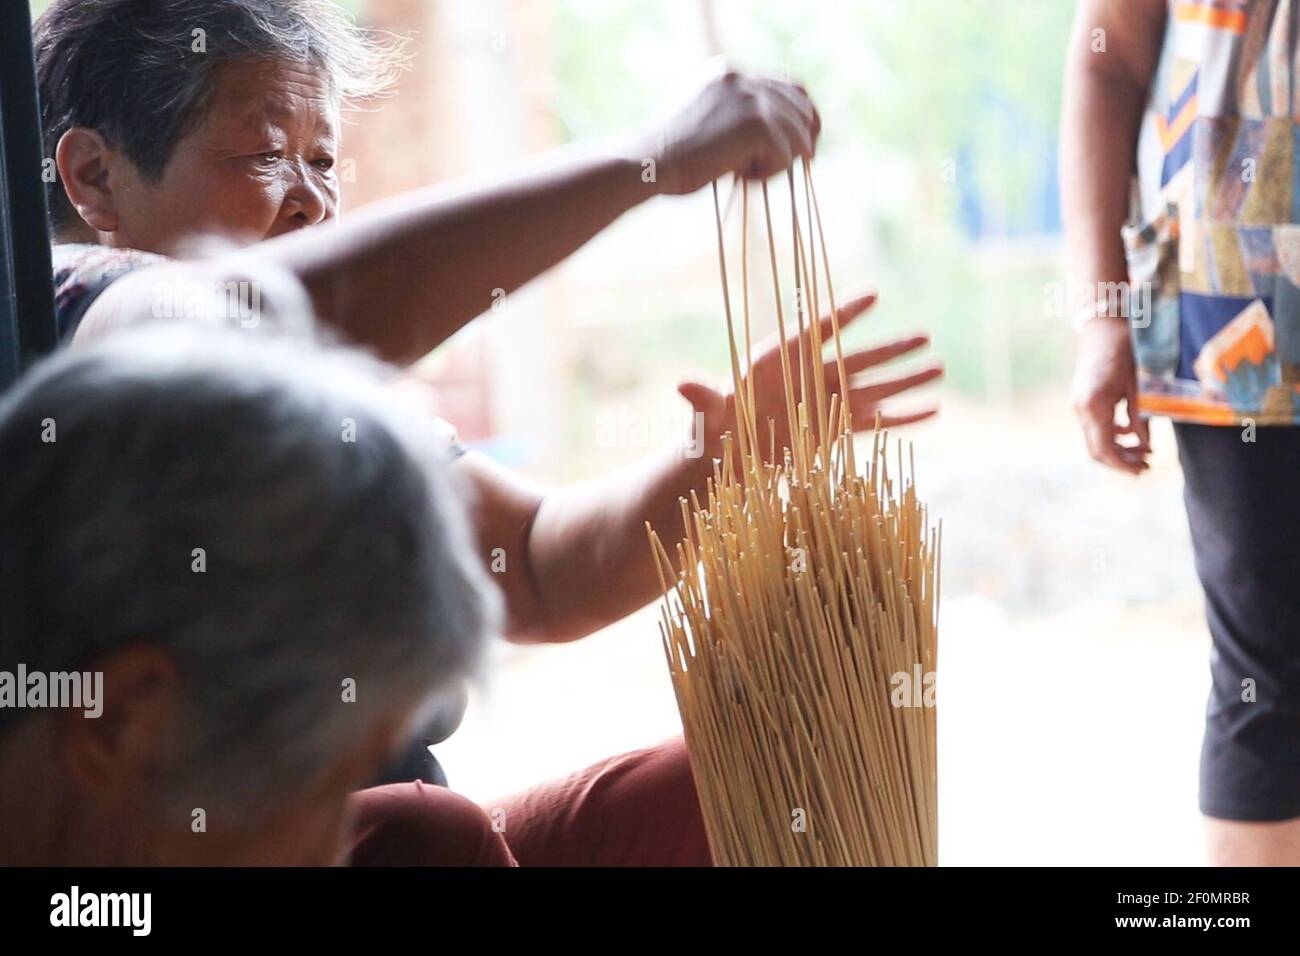 In this undated photo, Chinese workers sort out wheat straws on the Alibaba's e-commerce platform Taobao in Qingfeng county, Anyang city, central China's Henan province. Meng Fanyao of Henan sees the value in biodegradable wheat straws, which once lay idle in the past. With China's increasing awareness of environmentalism however, the straws are now being put to use. Having worked for some time away from his hometown, Meng returned to the countryside to start a business. He found that the local wheat straws are tall, brightly colored and of wide diameter, so Meng decided to seize the business  Stock Photo